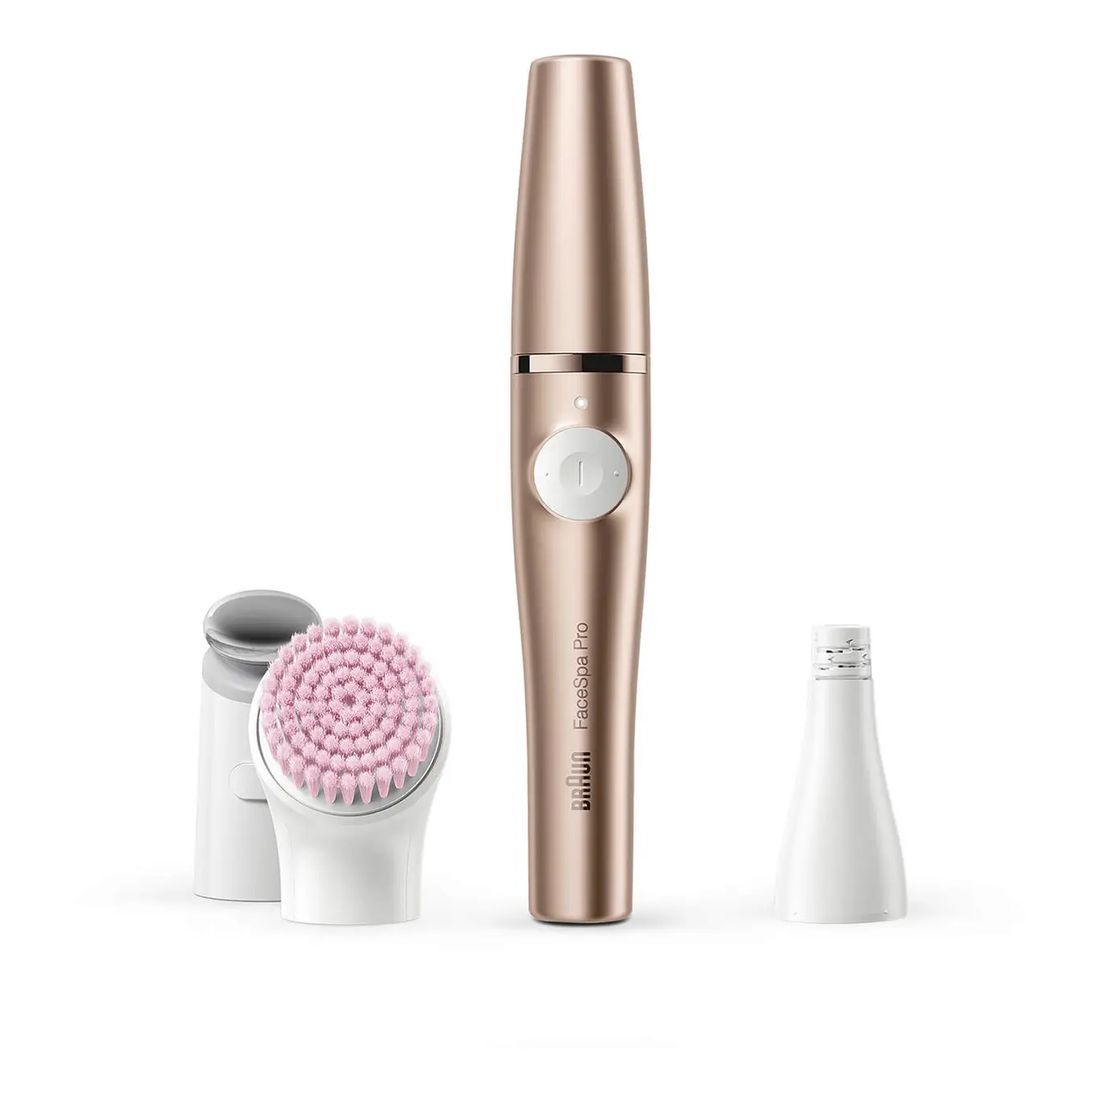 Braun FaceSpa Pro 921 3-in-1 Facial Epilating Cleansing & Skin Toning System with 5 Extras